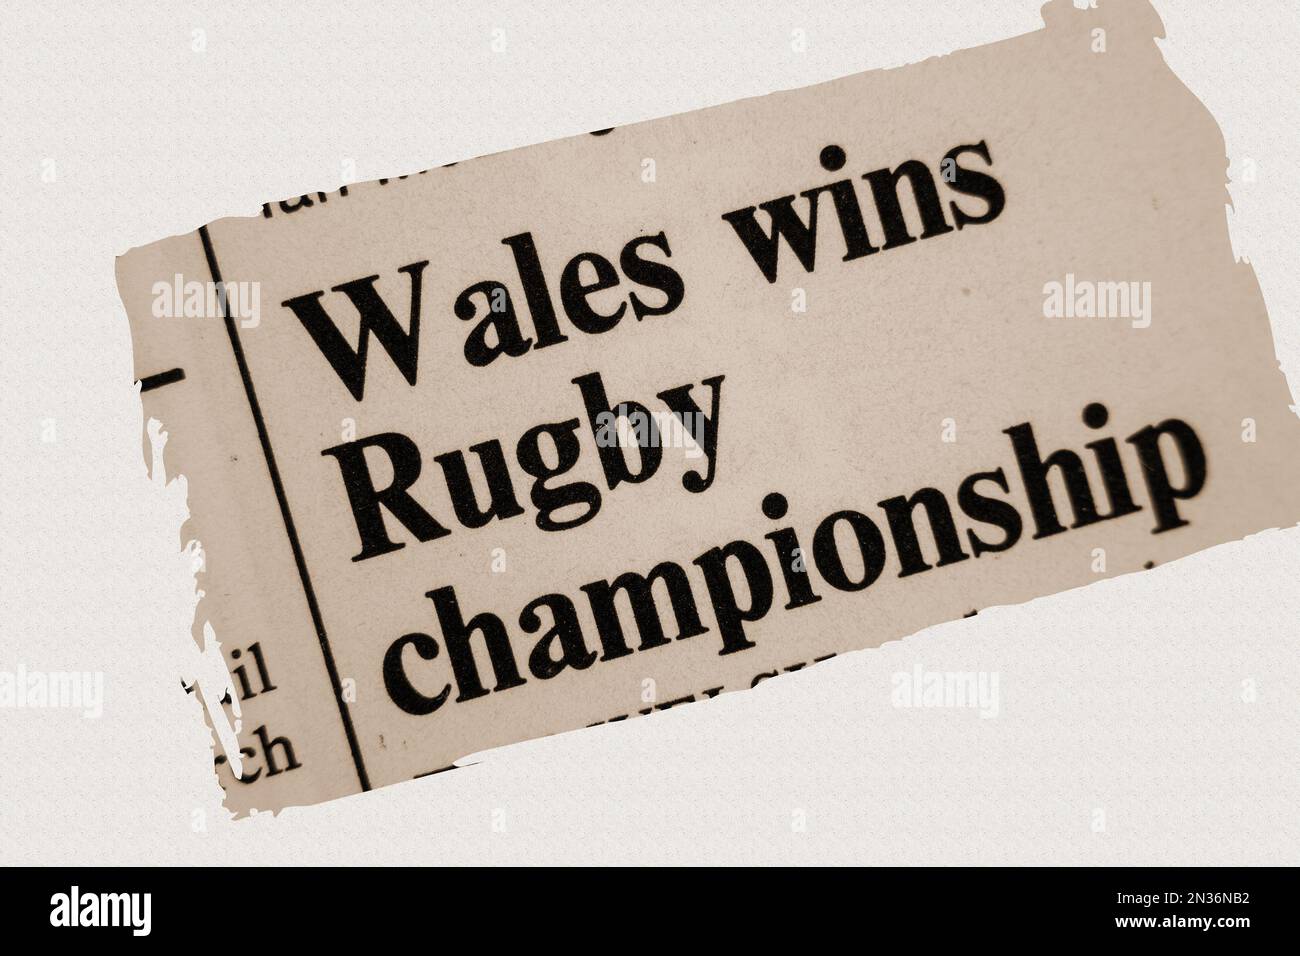 Wales wins Rugby championship - news story from 1975 newspaper headline article title in sepia Stock Photo